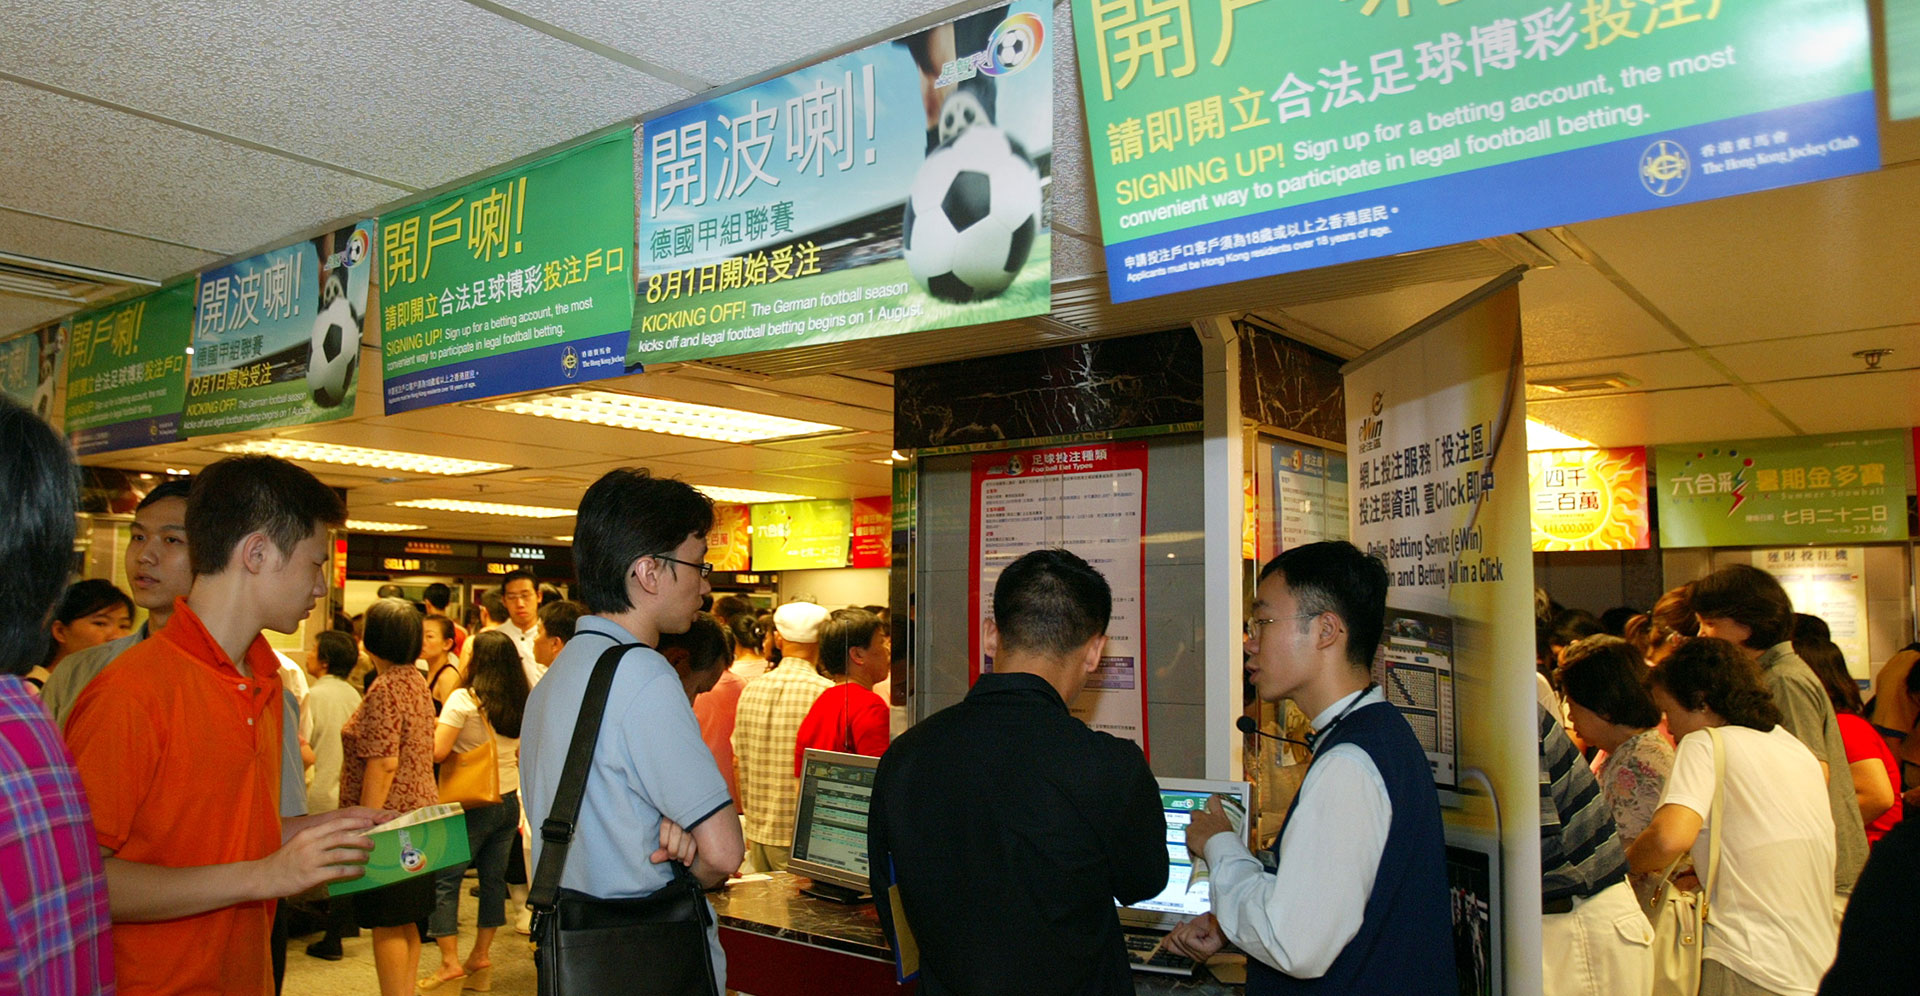 Regulated football betting was launched by the Club in 2003 to support the Government to combat illegal betting.